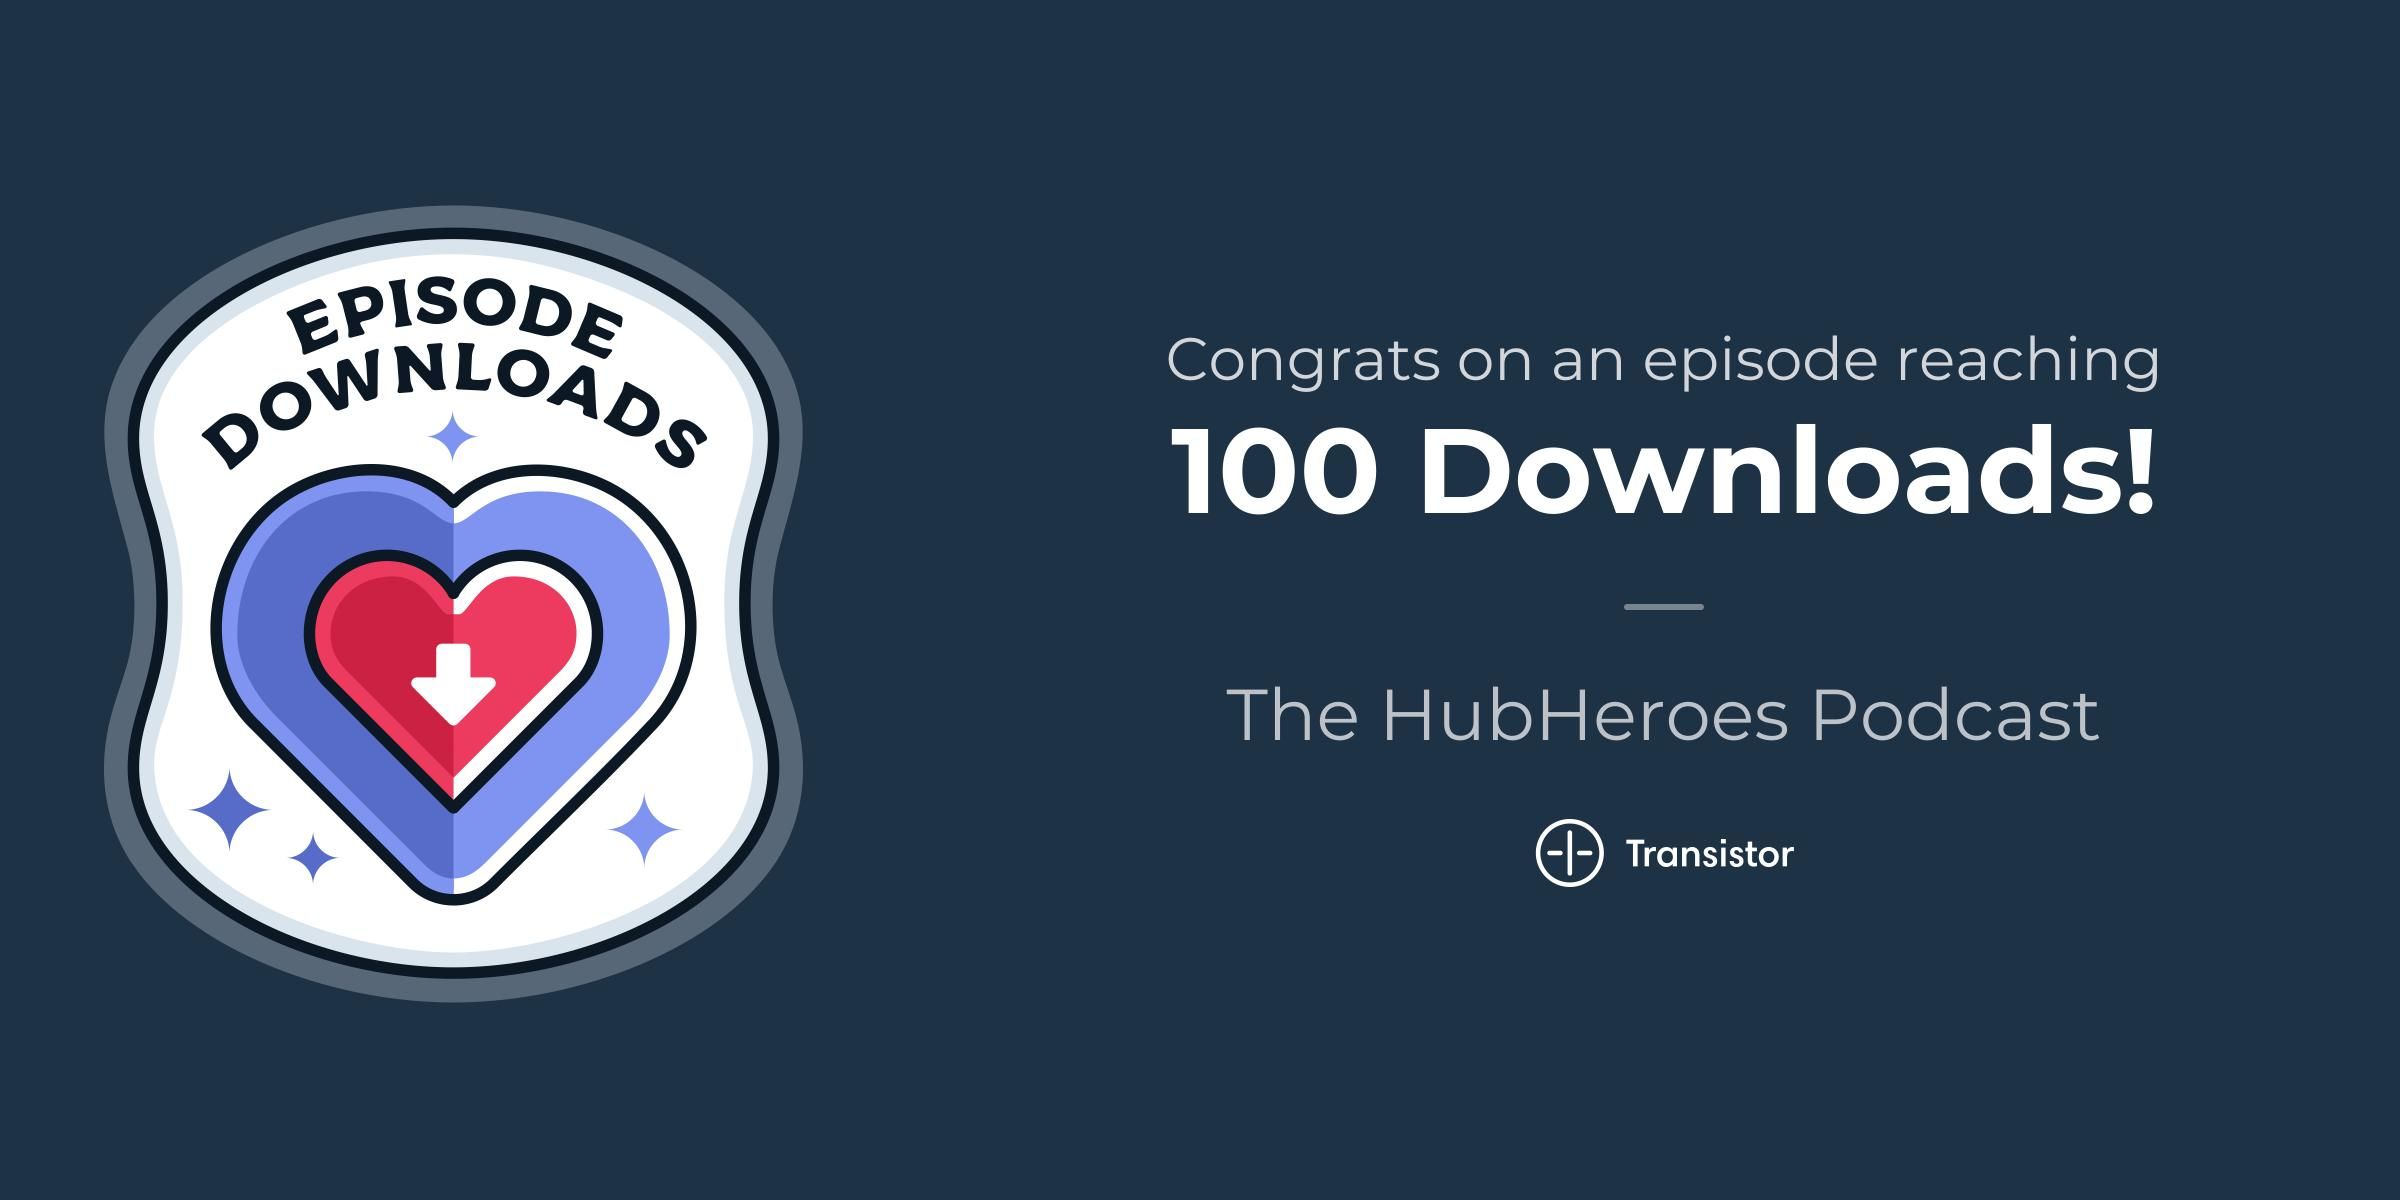 the-hubheroes-podcast-episode_downloads-100